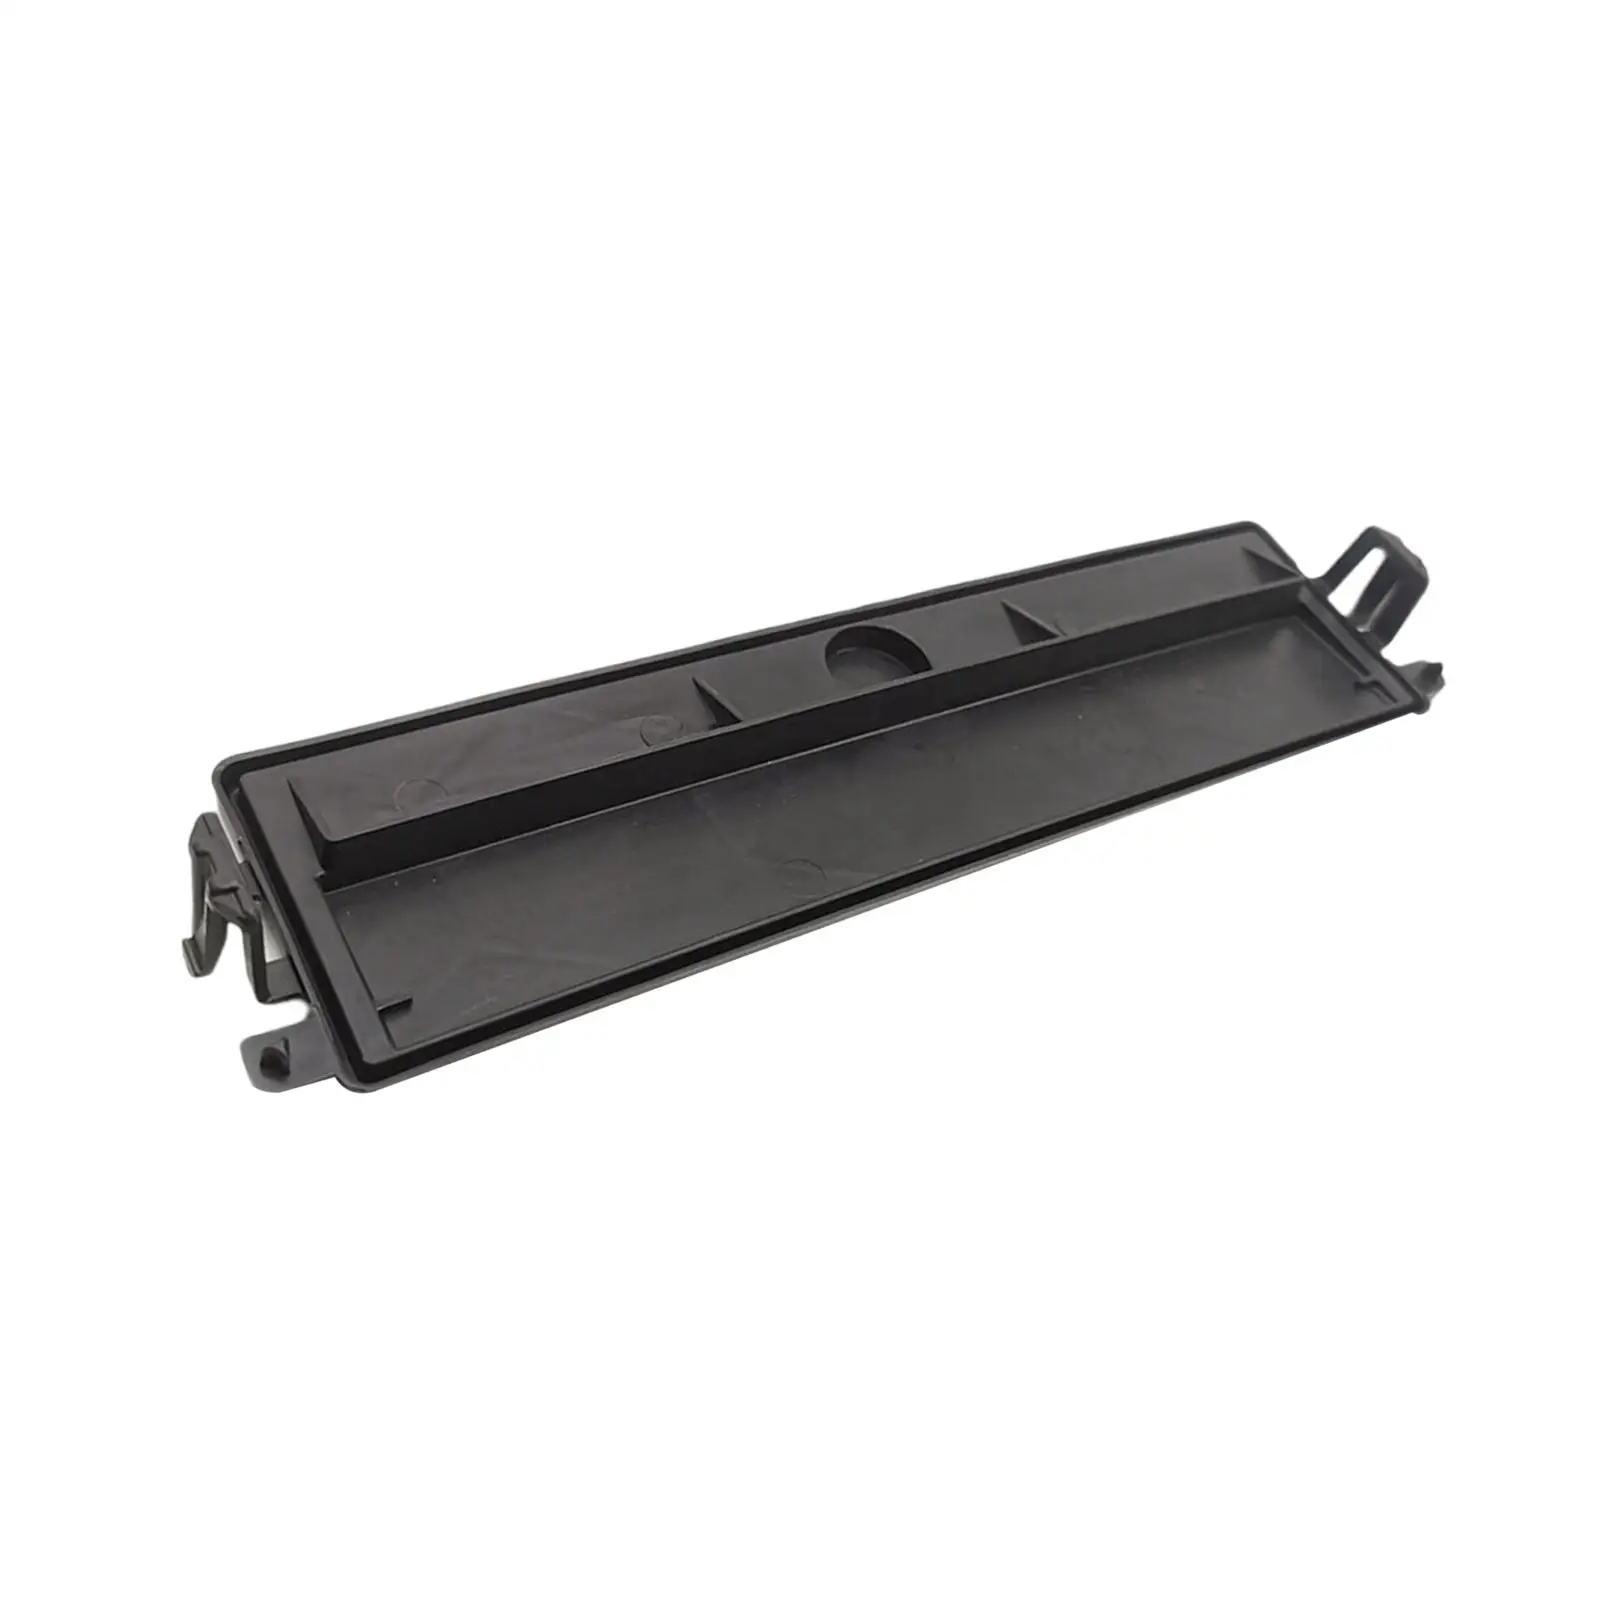 79303-Tba-A11 cabin Air Filter Cover for Civic 2.0L 1.5L High Performance